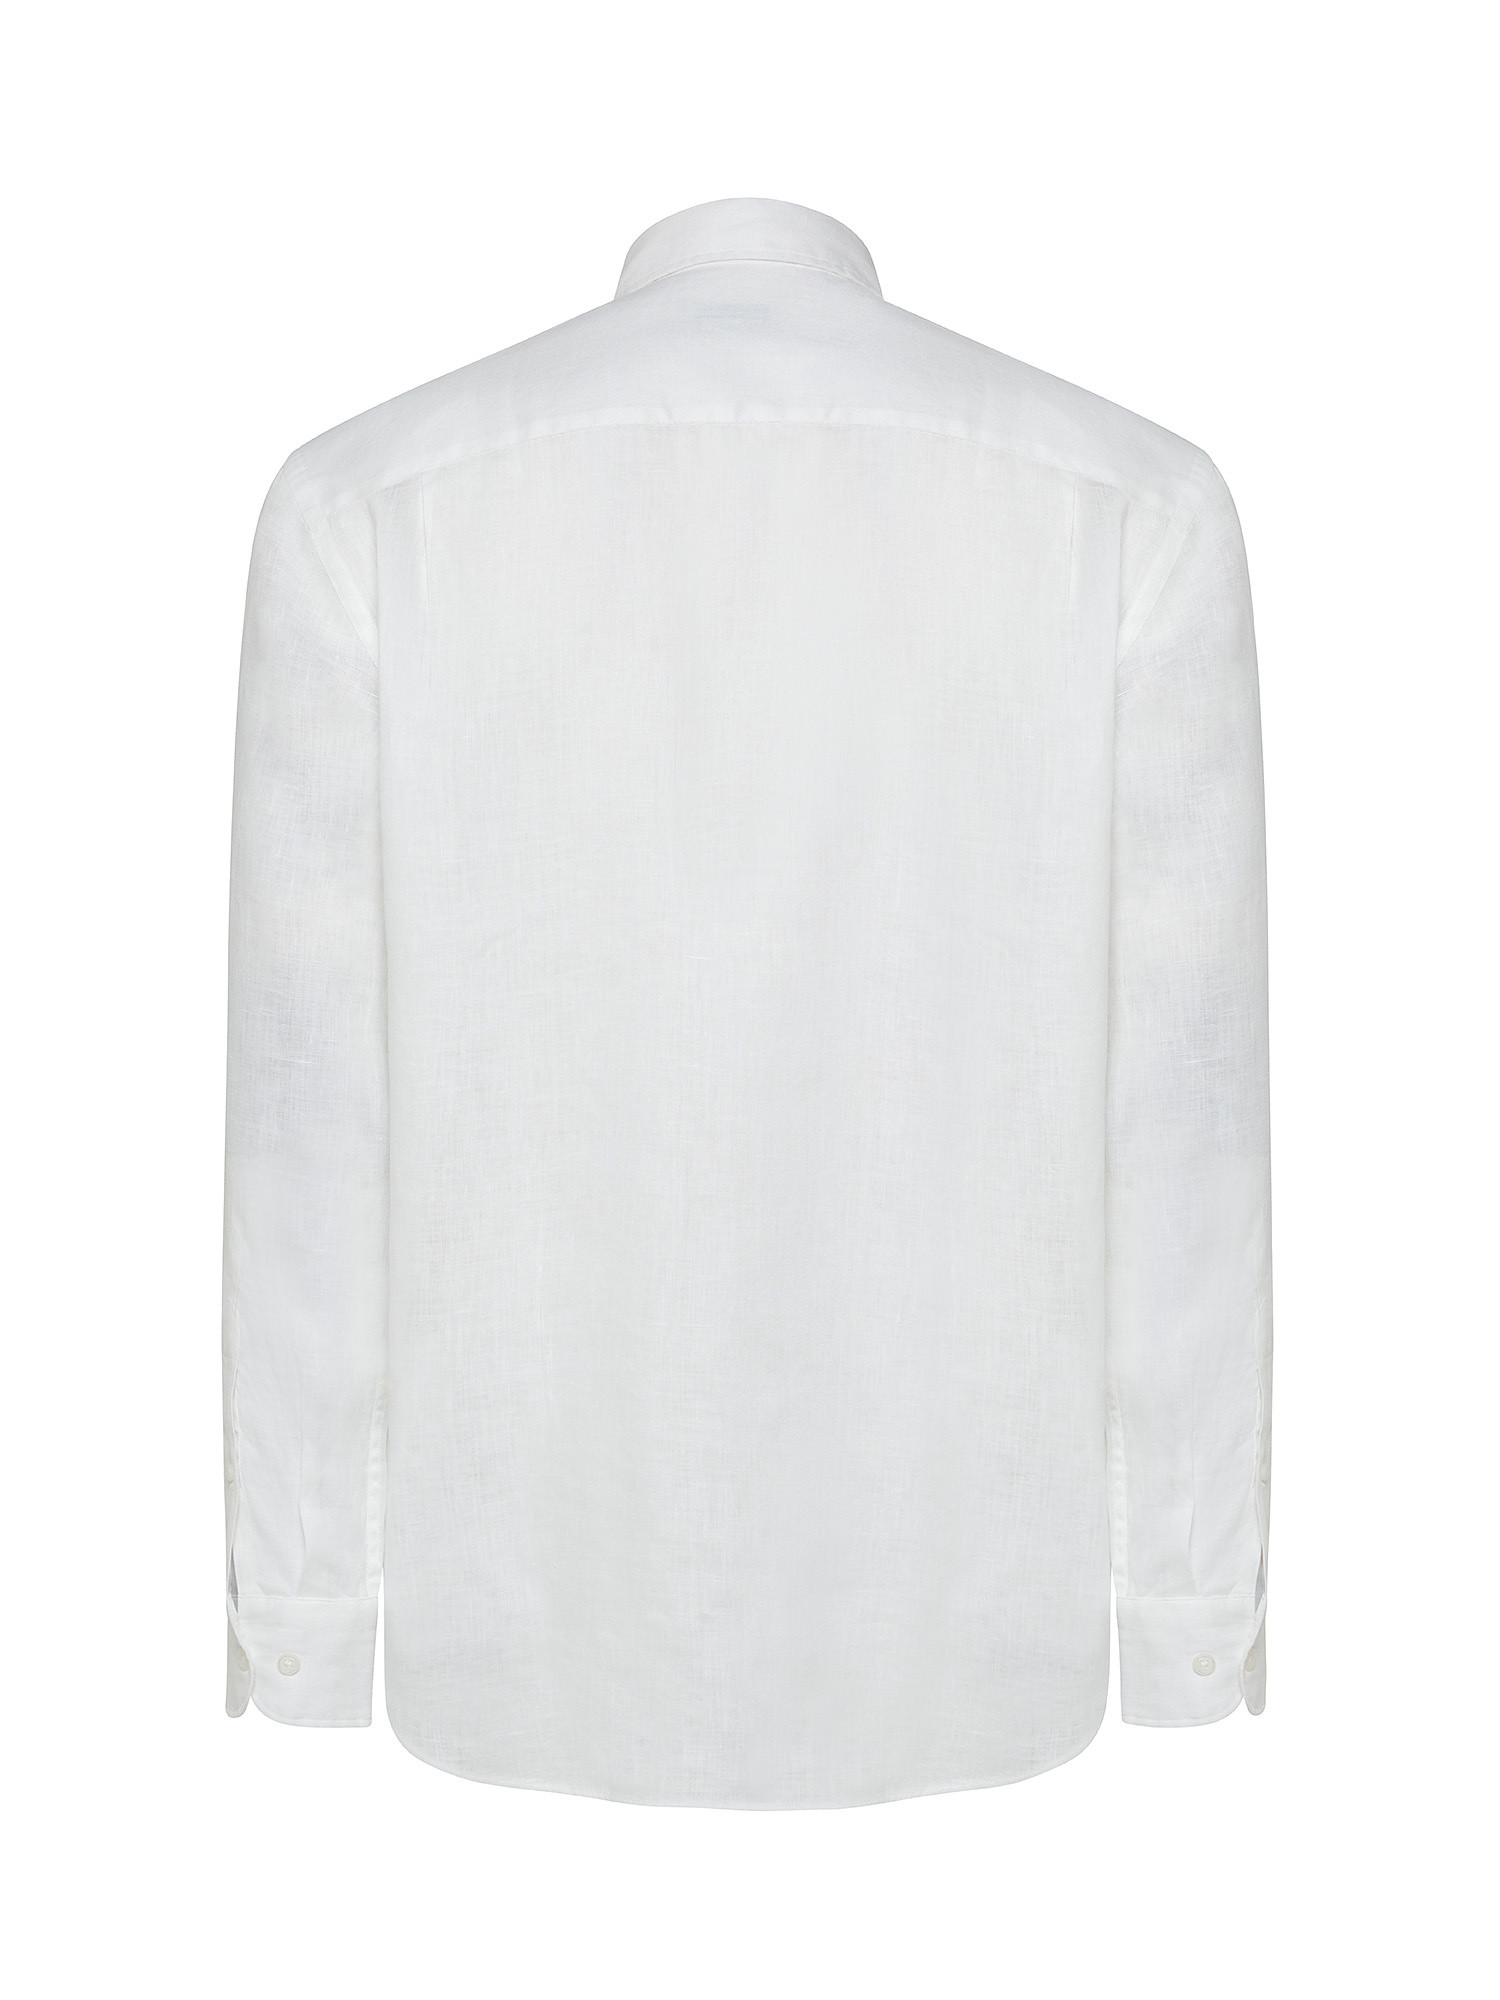 Luca D'Altieri - Regular fit shirt in pure linen, White, large image number 1